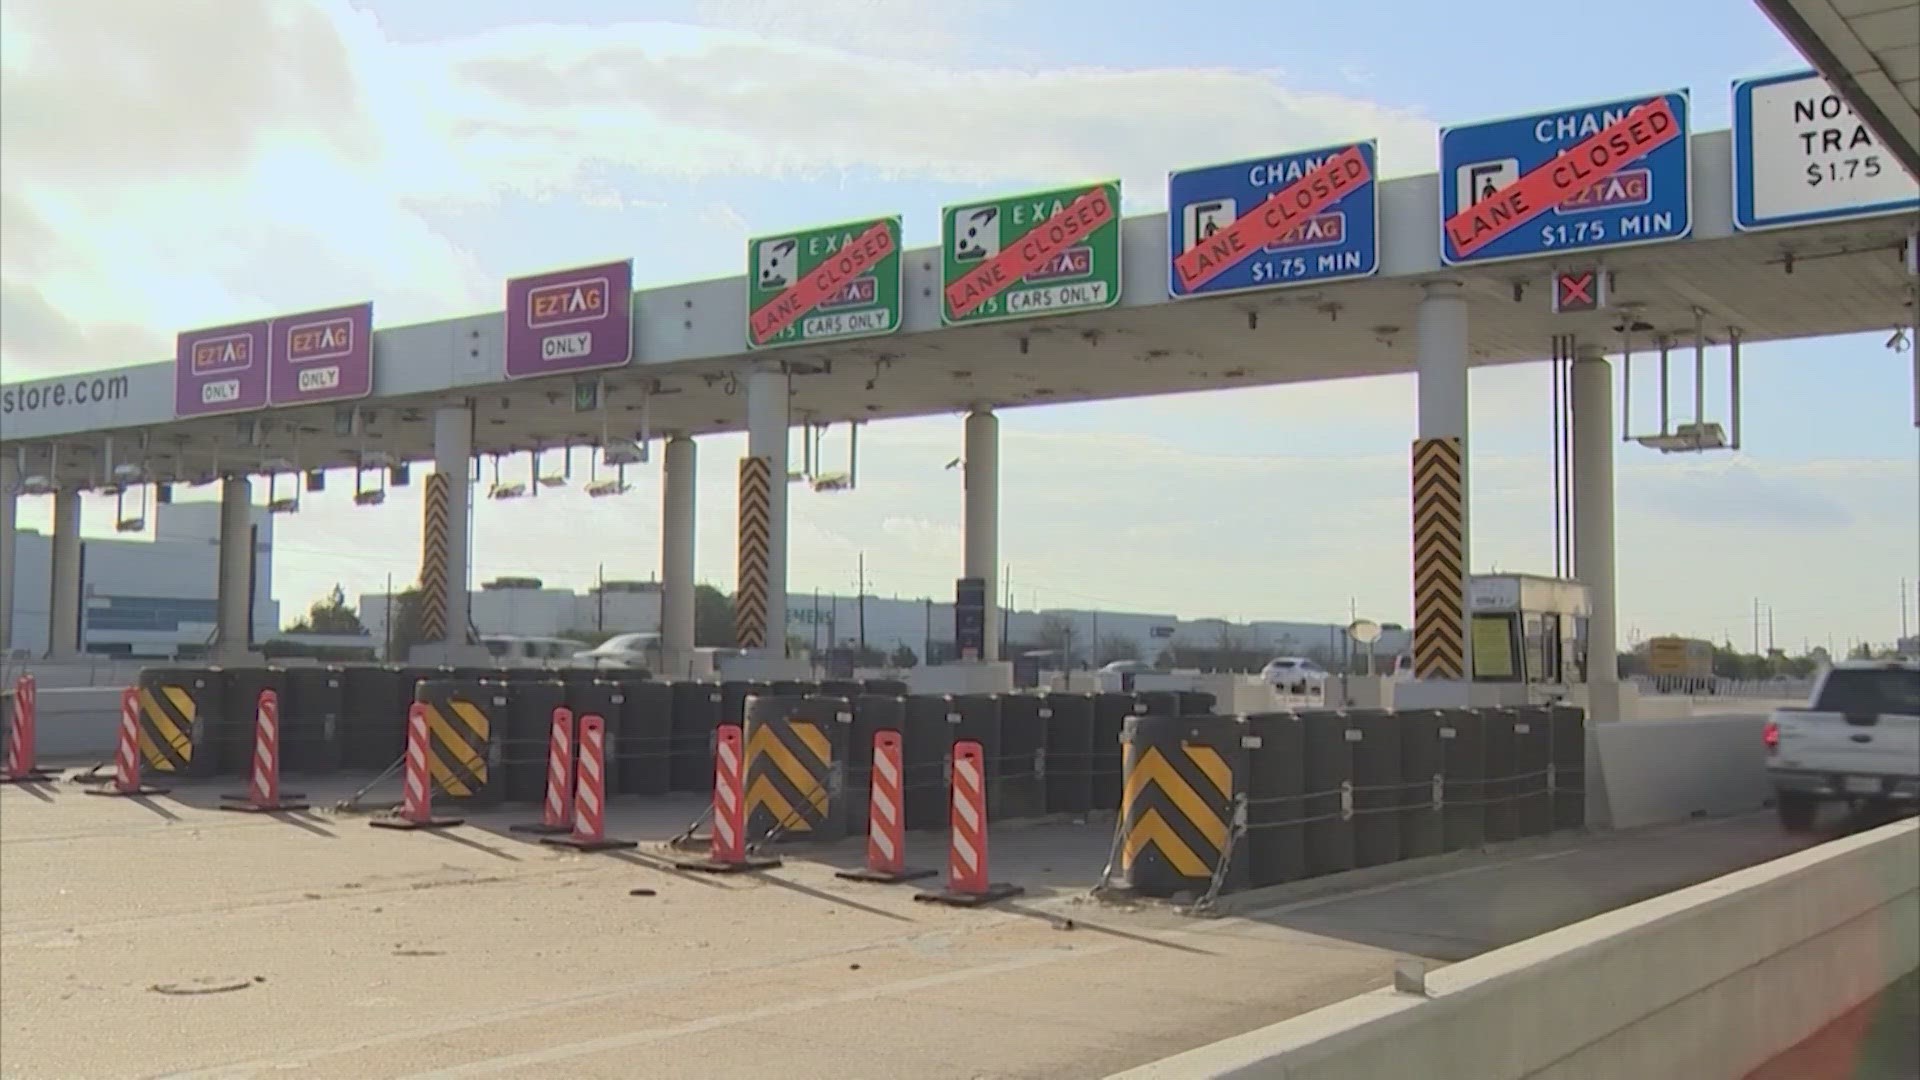 Since early March, the FBI said it has received more than 2,000 complaints of smishing texts that appear to represent toll collection services.